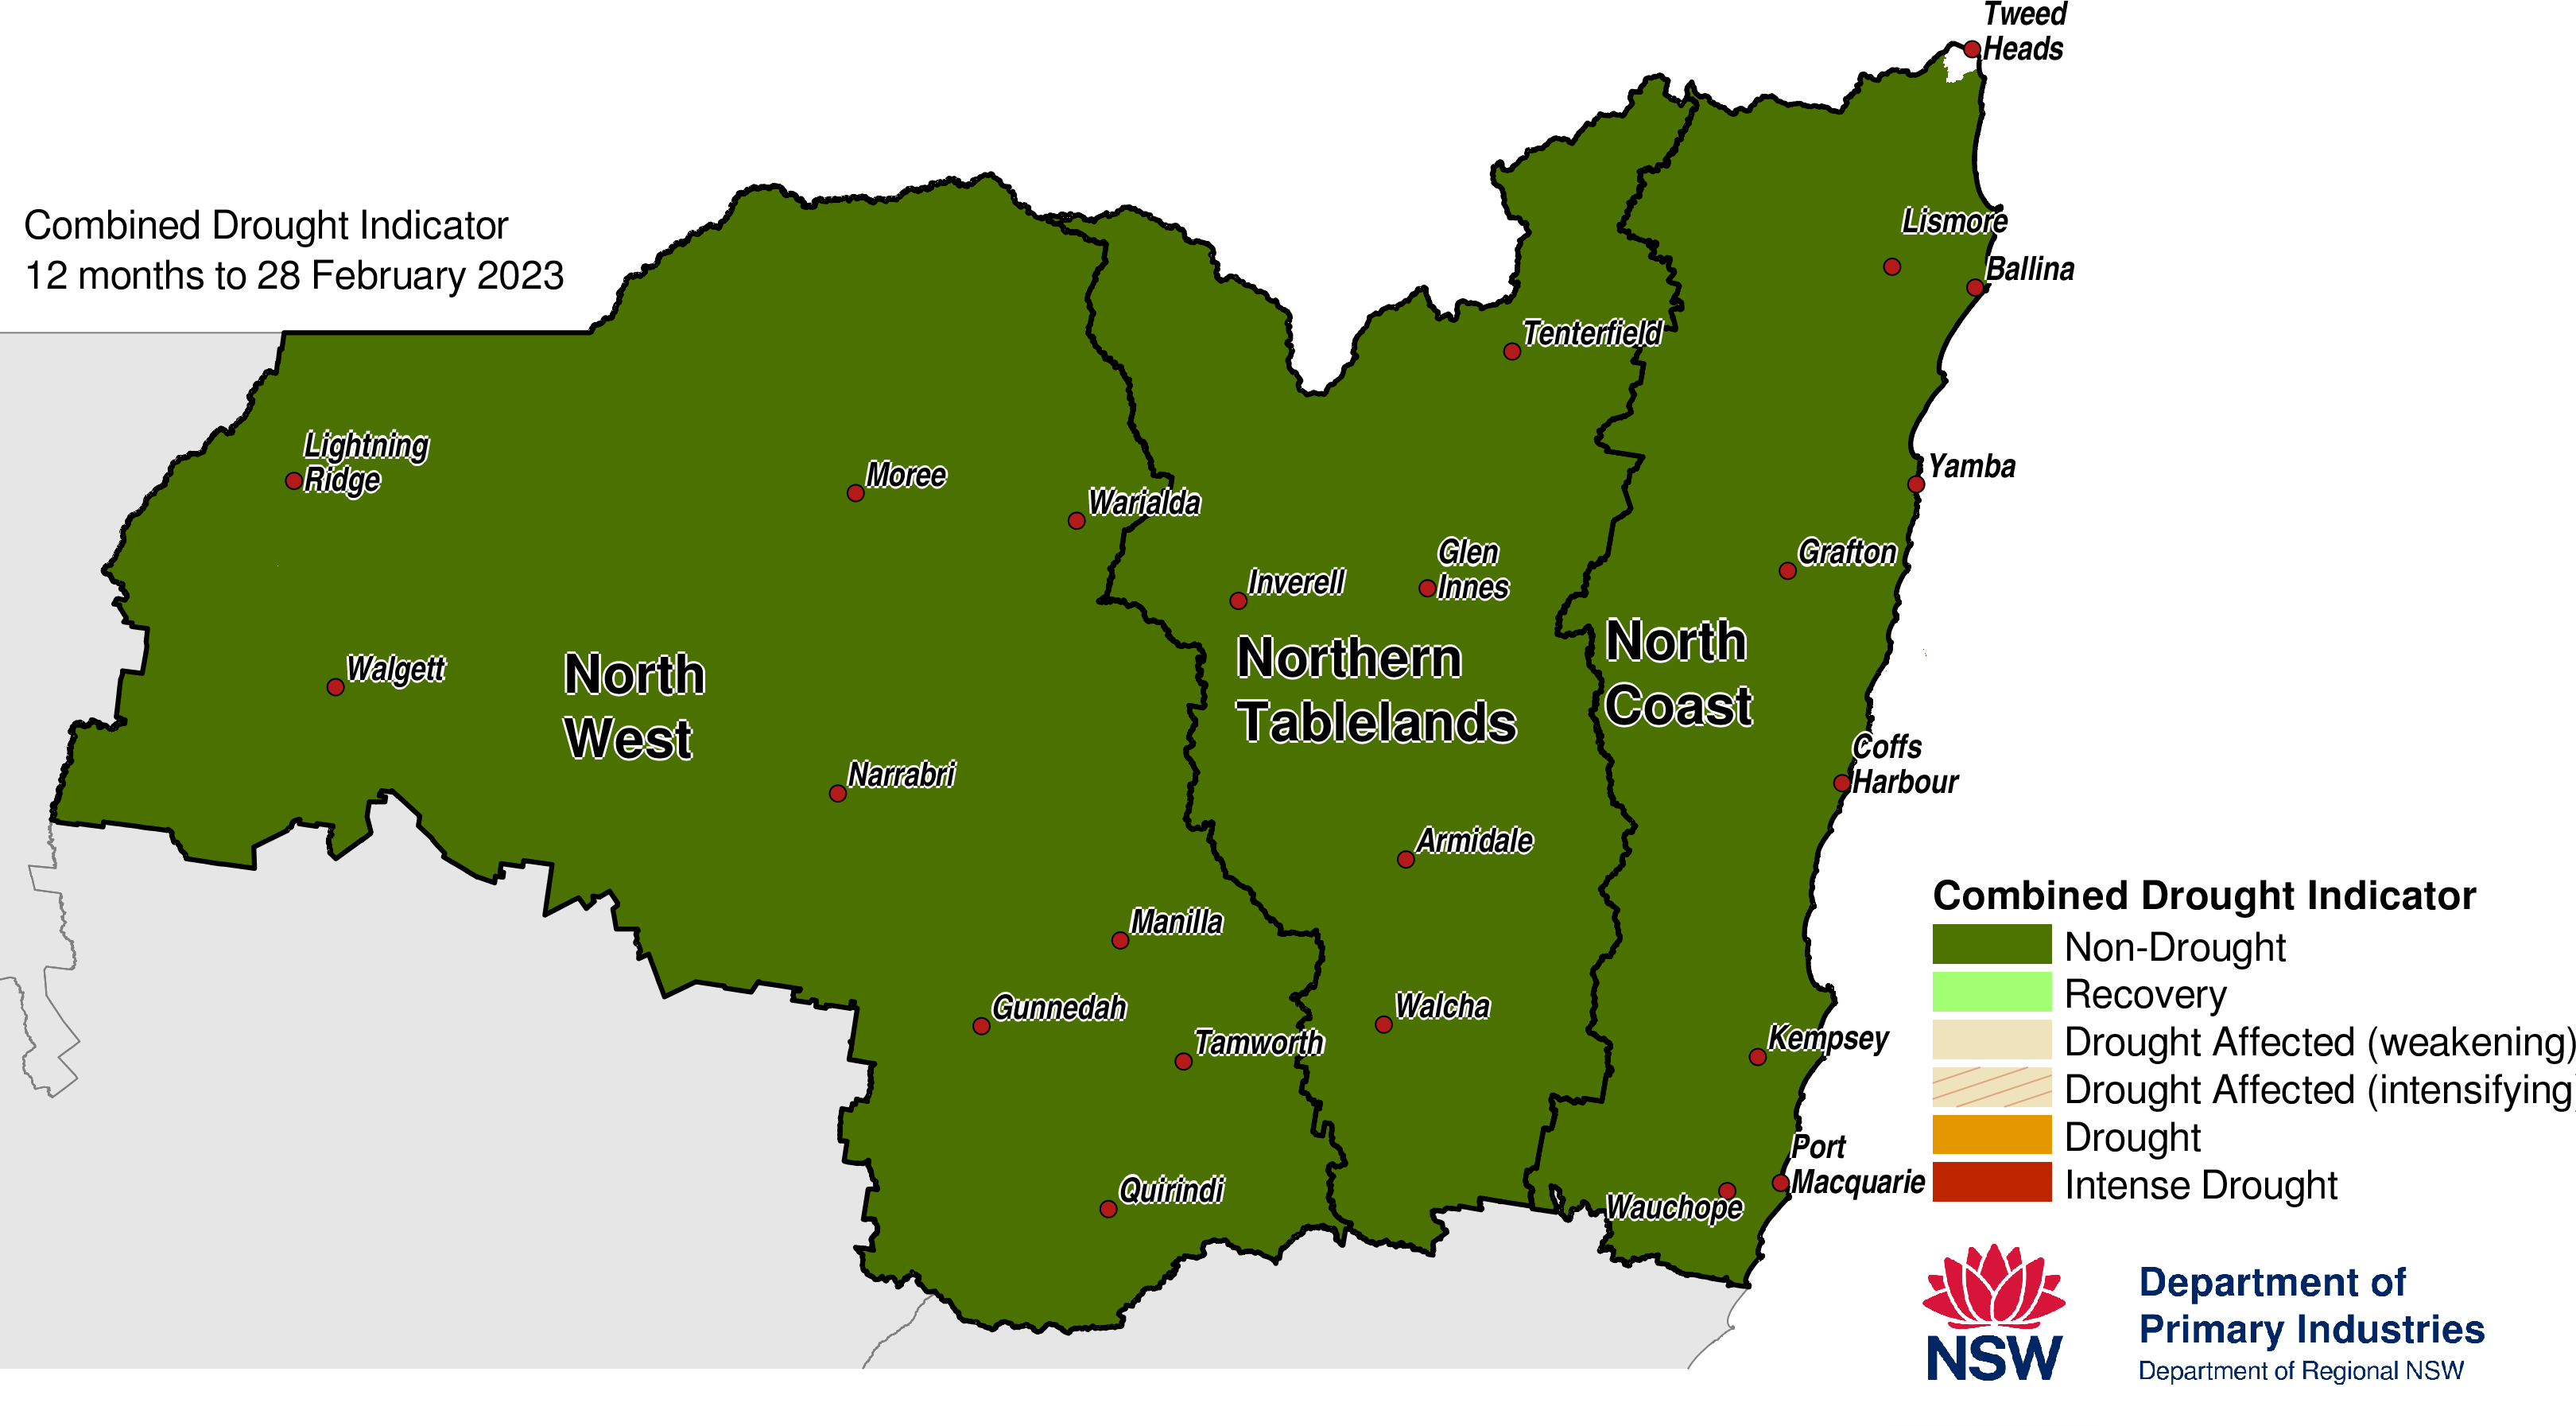 Figure 17. Combined Drought Indicator for the North West, Northern Tableland and North Coast regions 